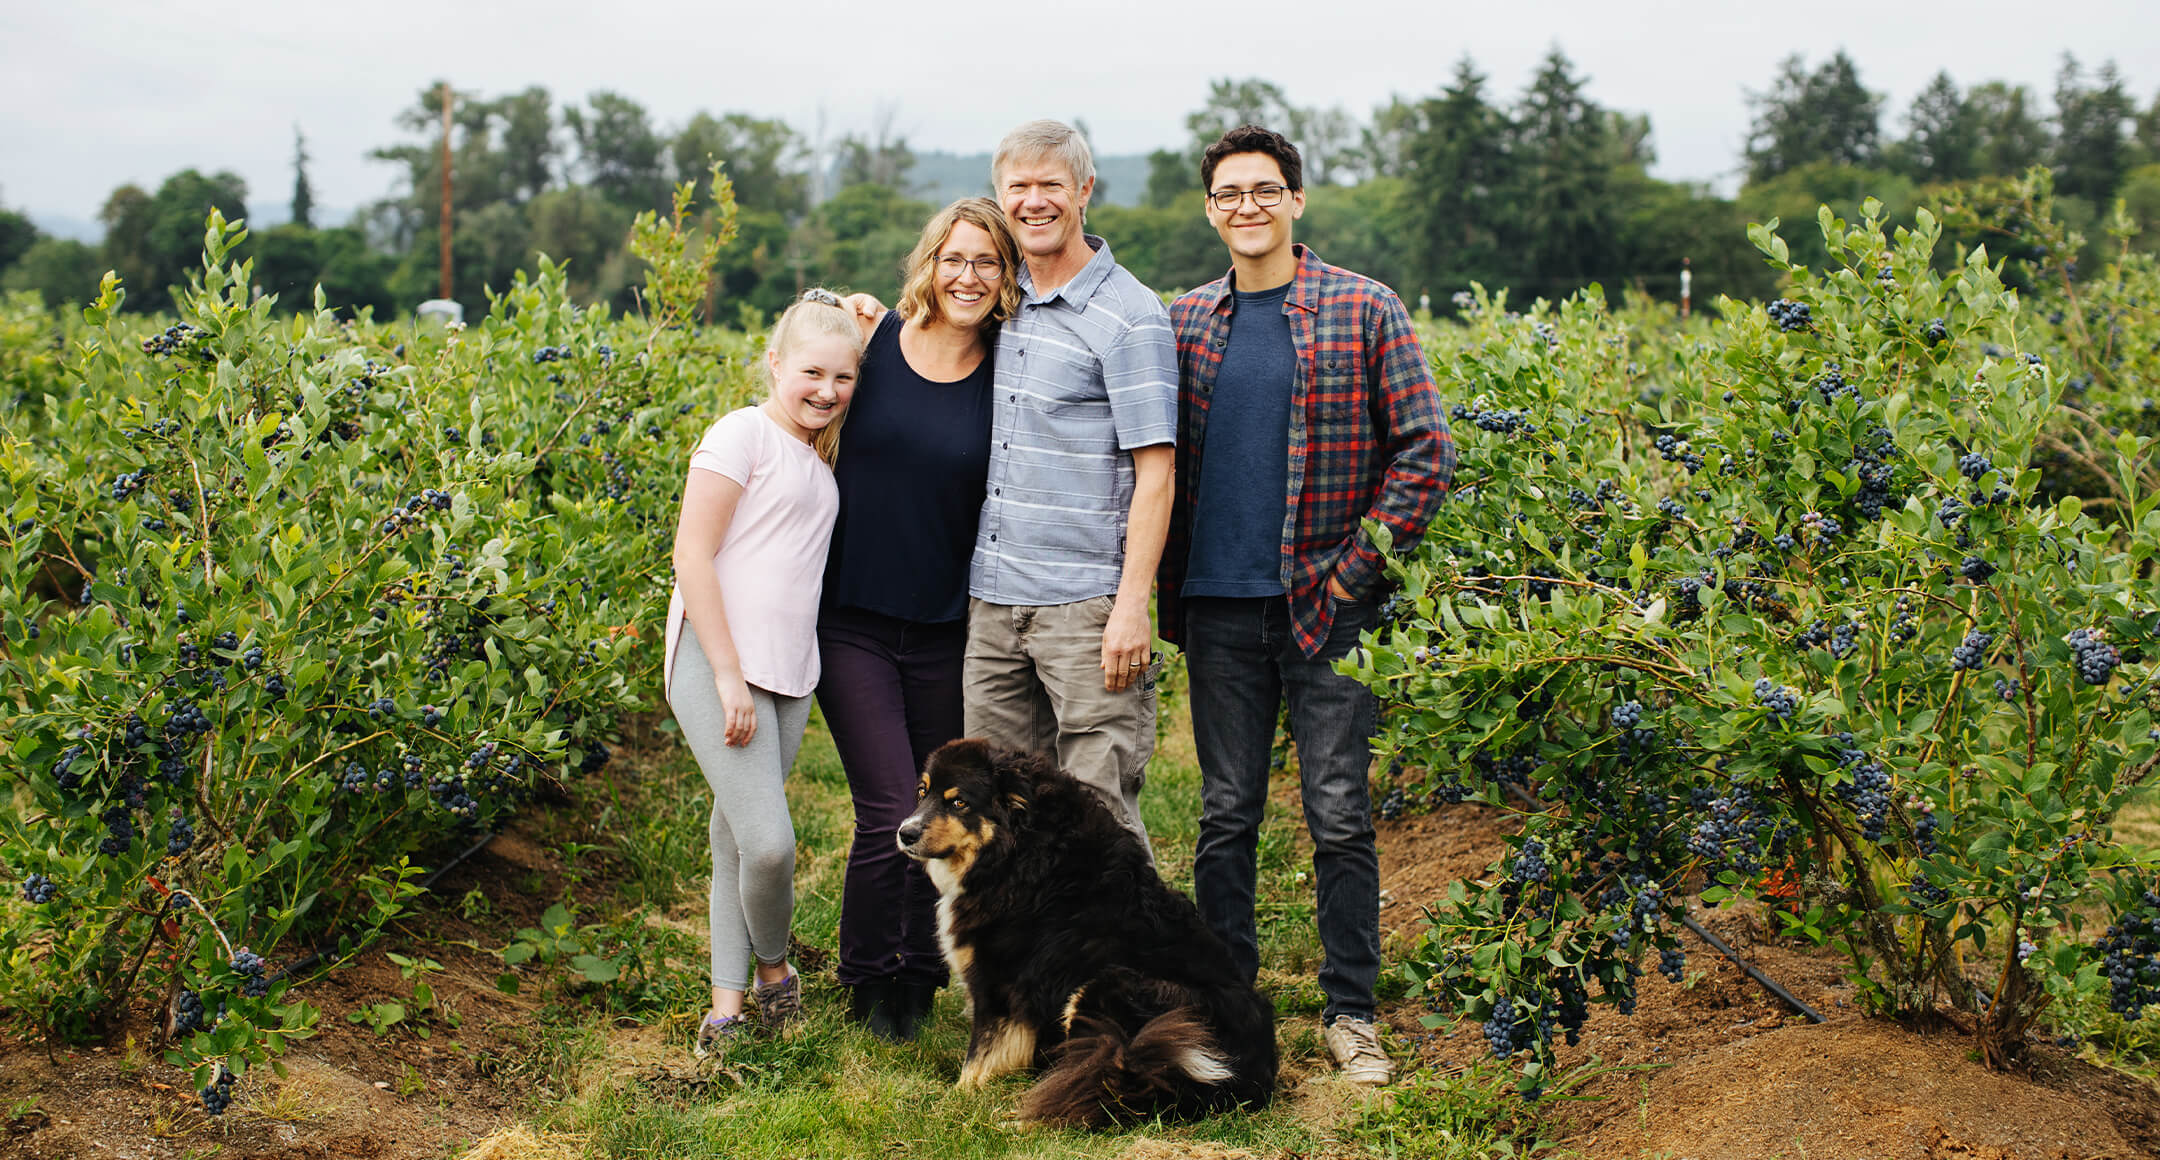 Certifiably Delicious: Springbank Farm Local Organic Blueberries